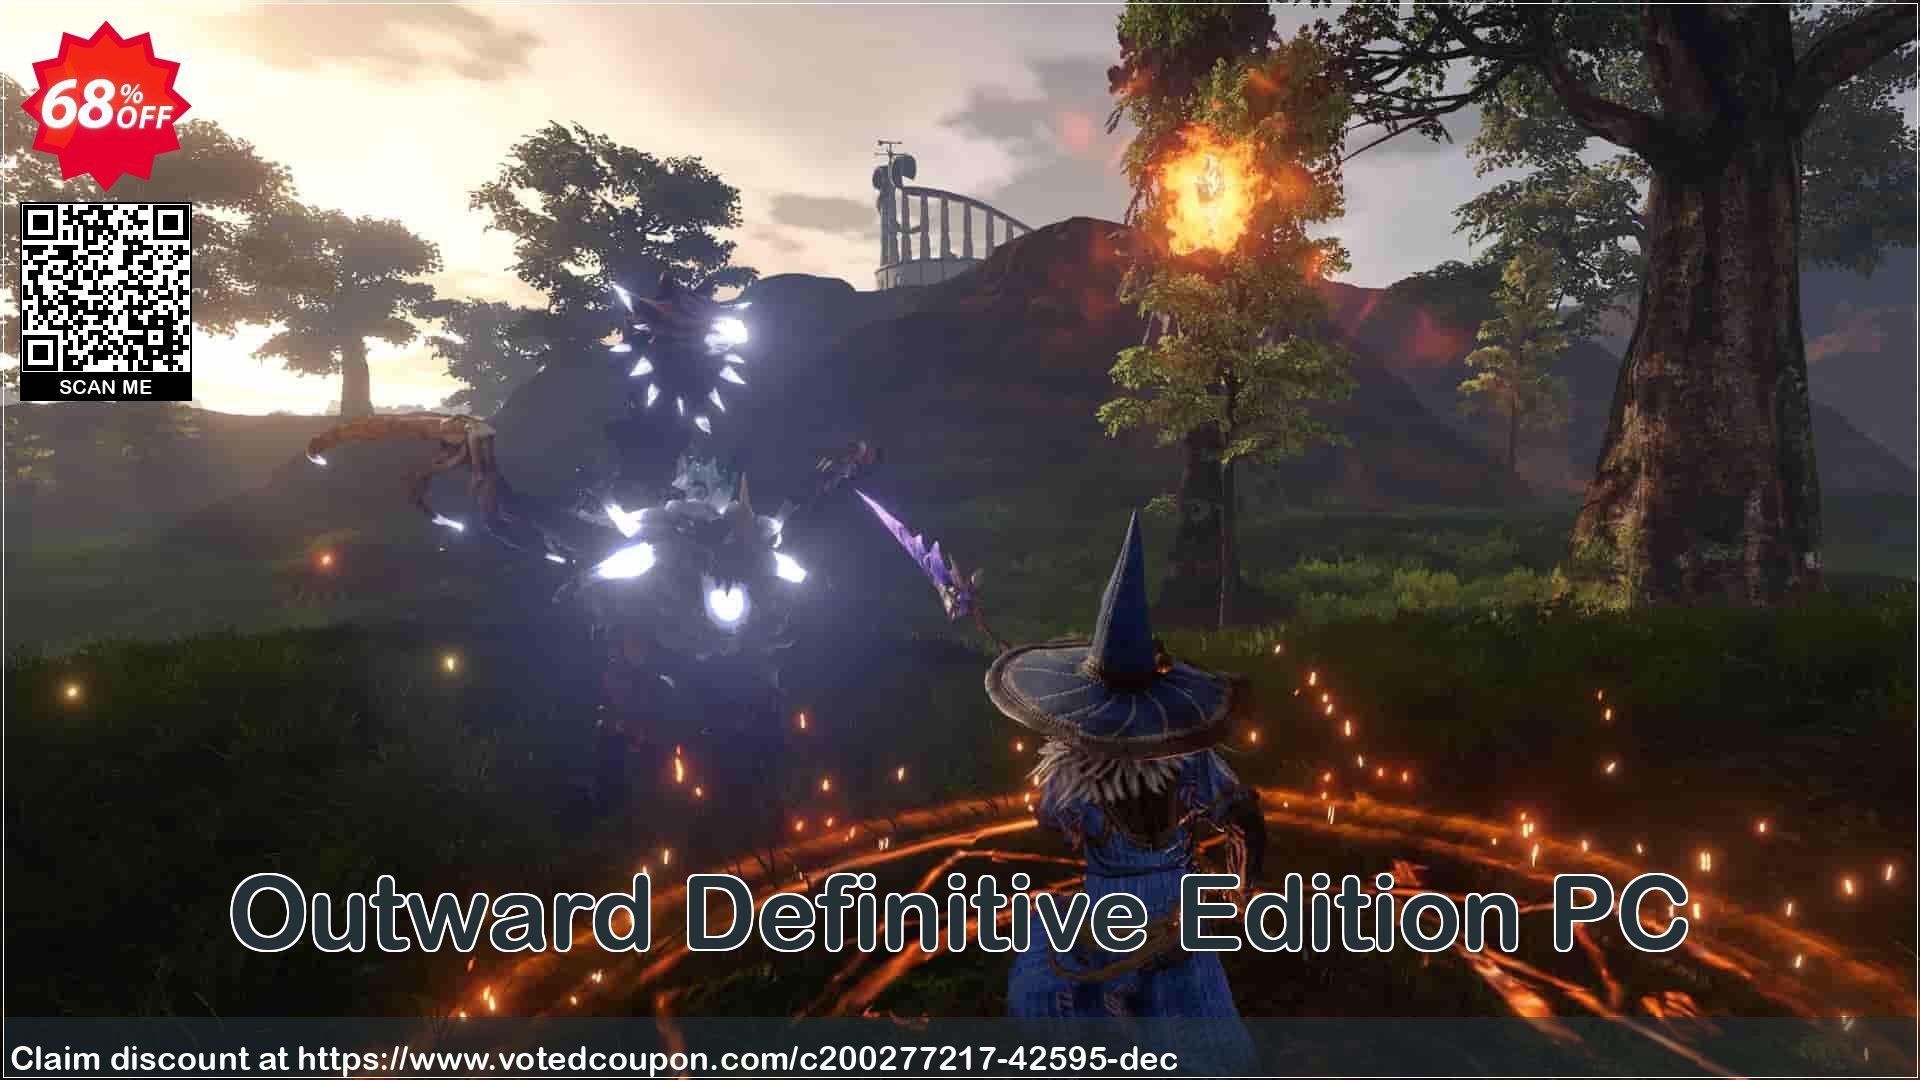 Outward Definitive Edition PC Coupon Code May 2024, 68% OFF - VotedCoupon